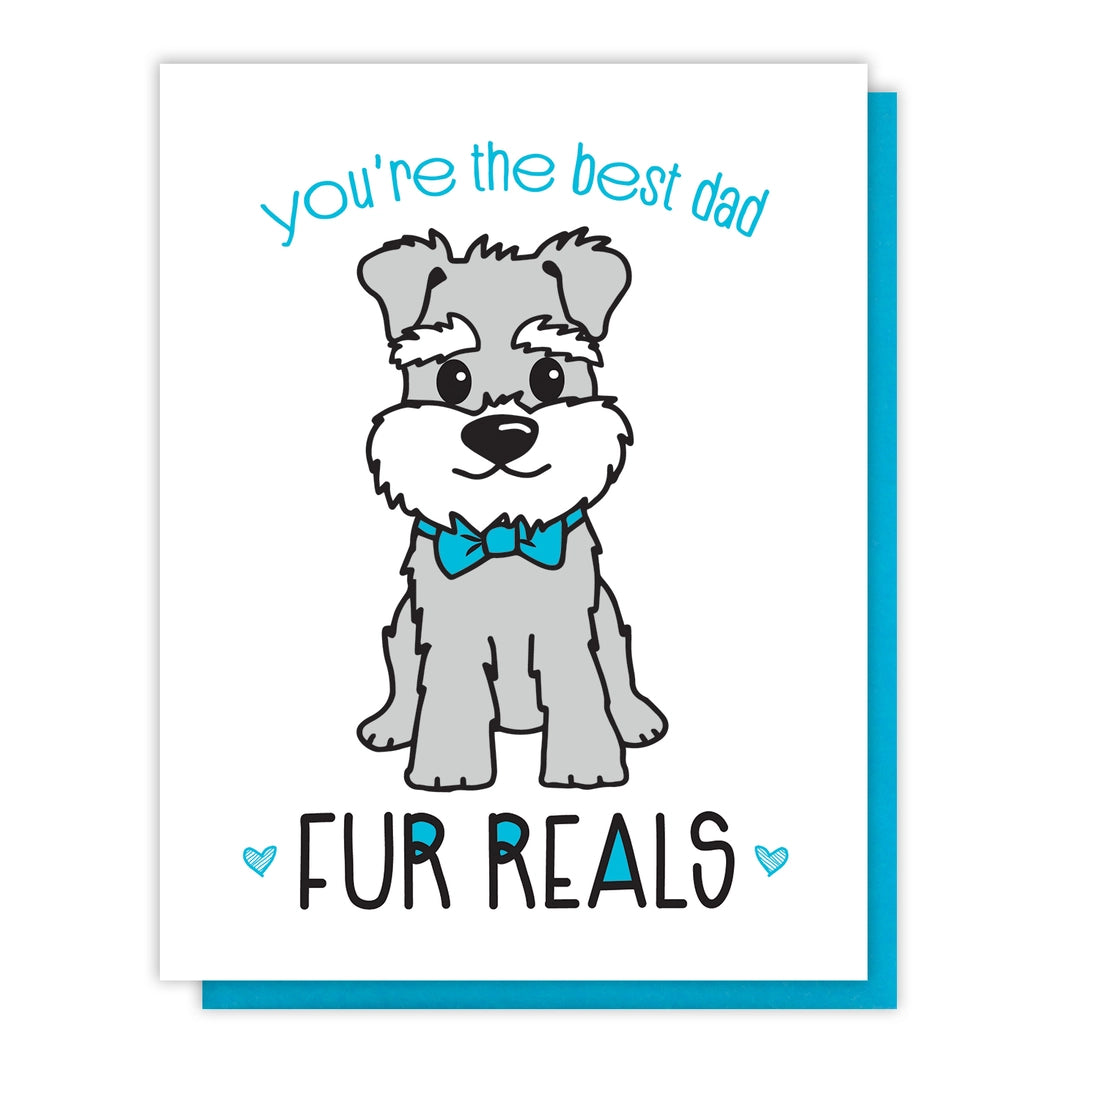 Isolated greeting card with a cute cartoon of a grey and white dog. The card states "you're the best dad FUR REALS"